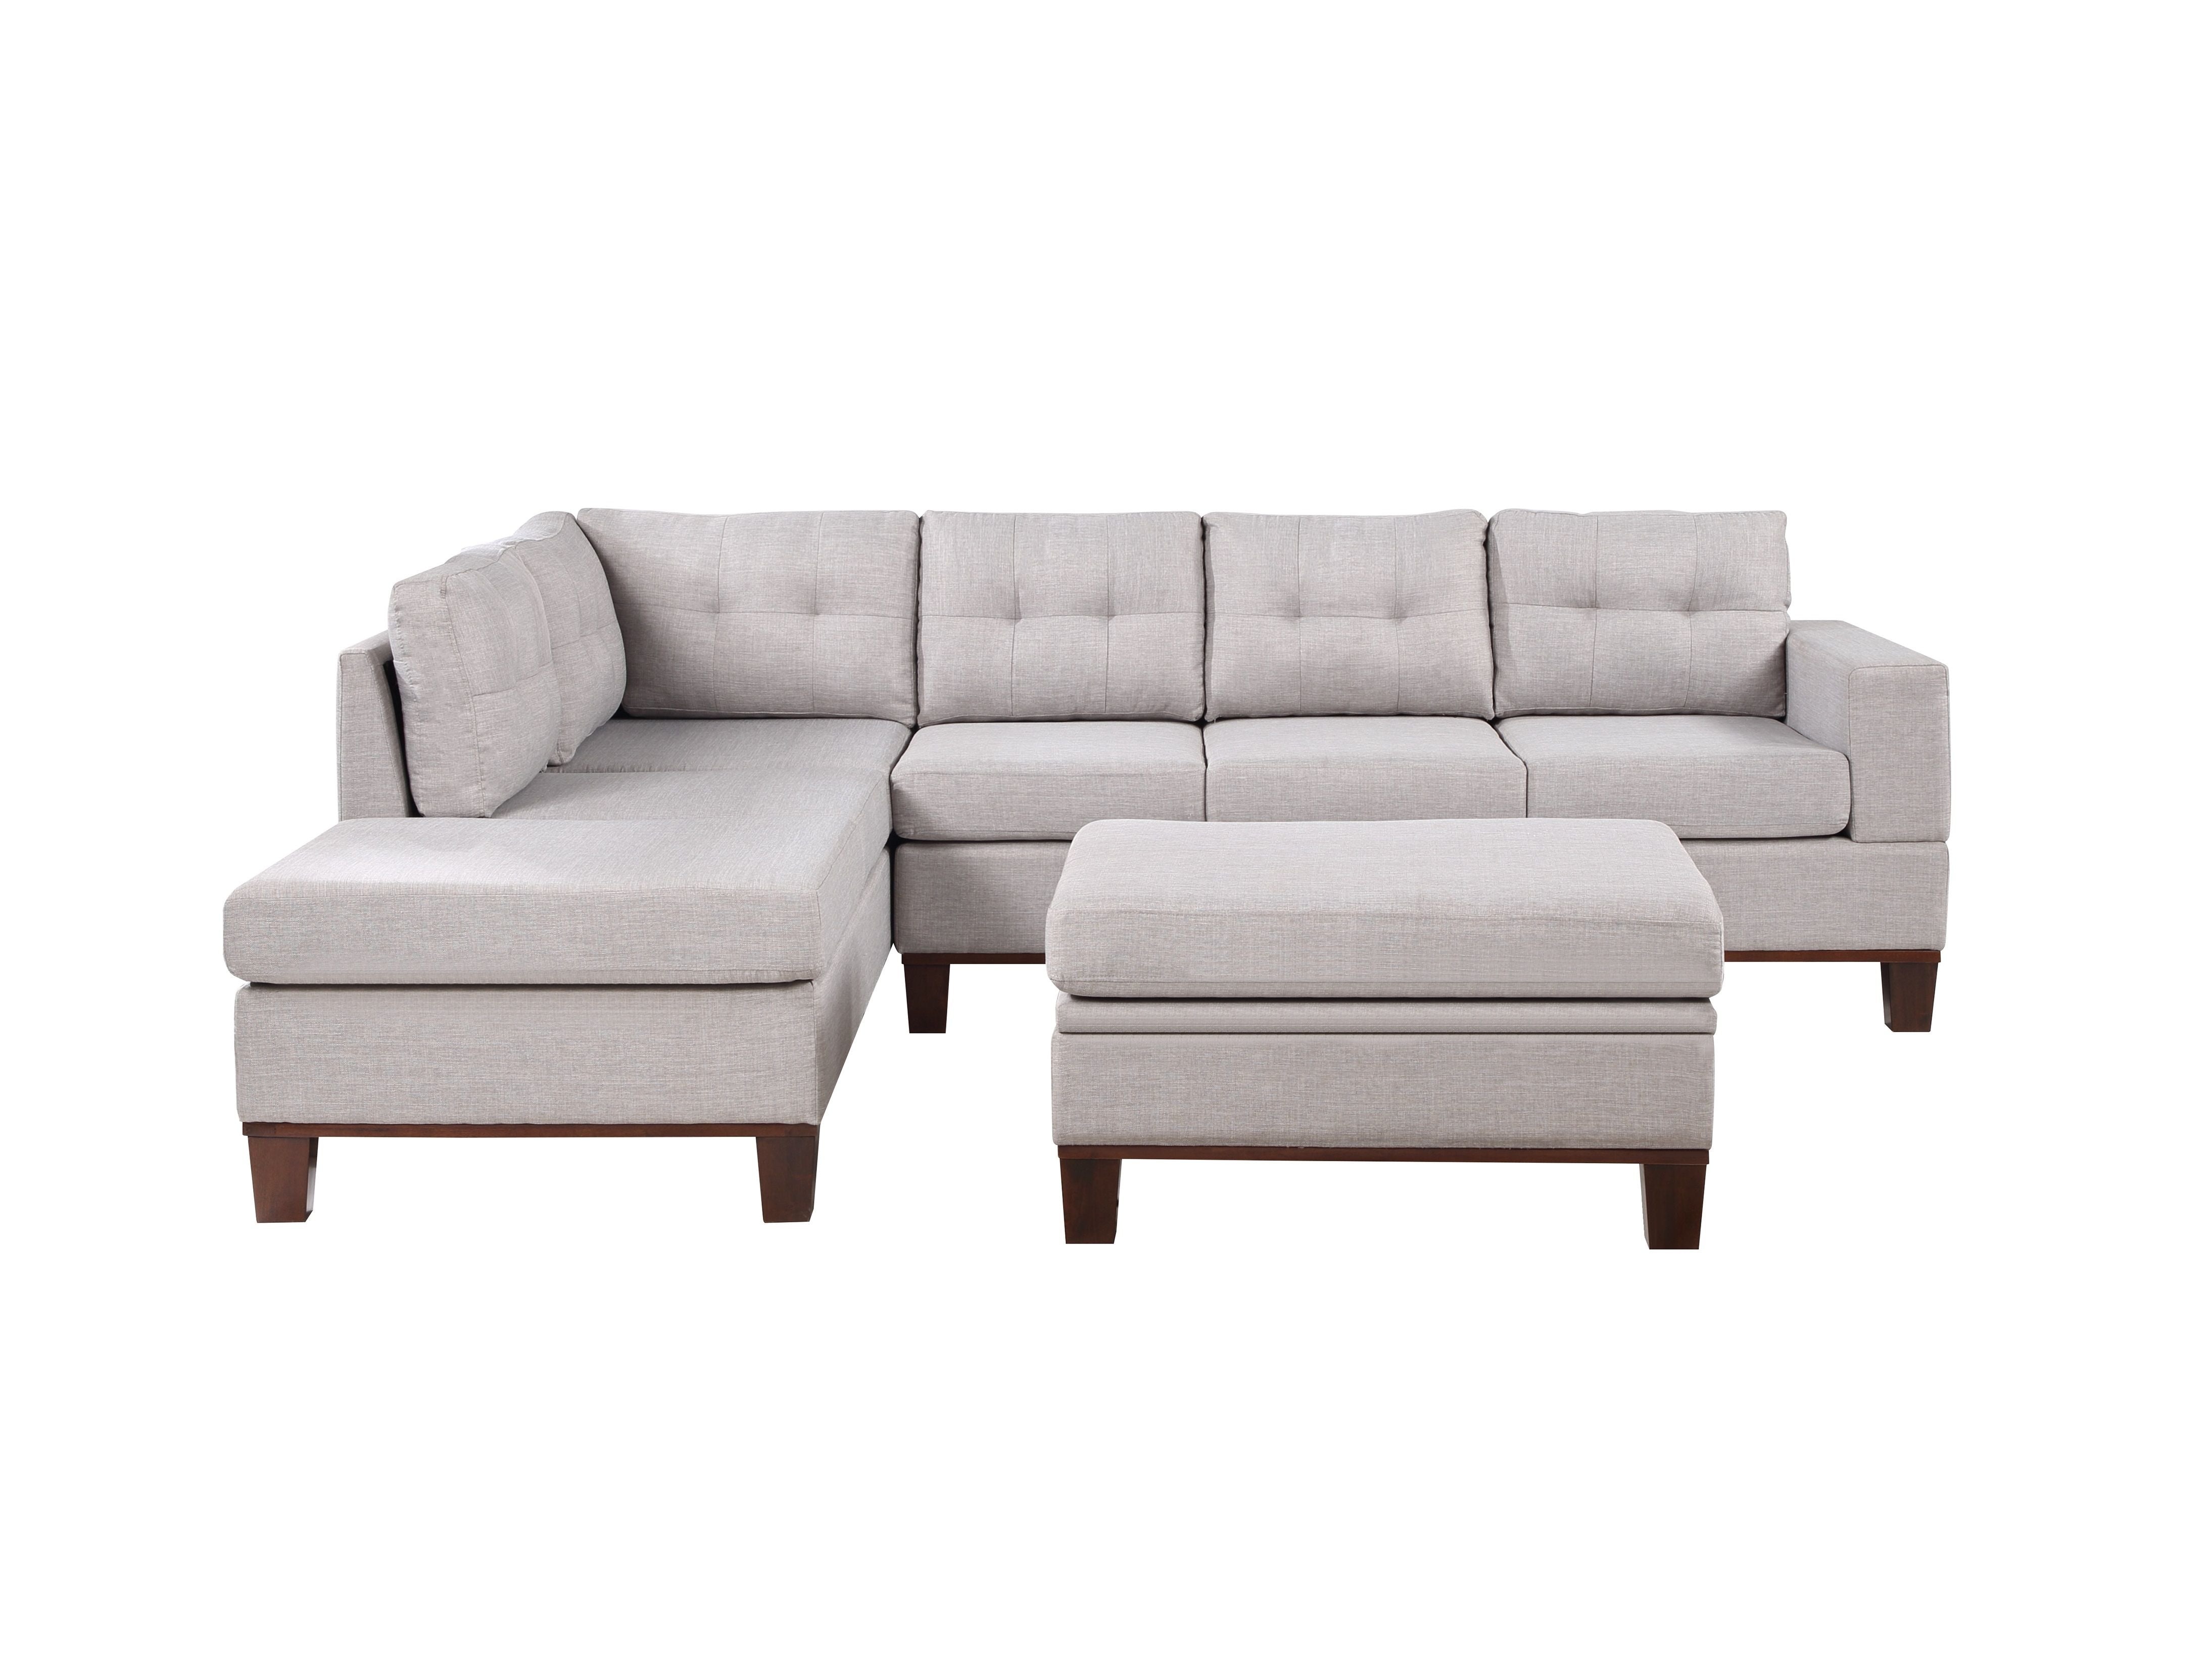 Hilo - Fabric Reversible Sectional Sofa With Dropdown Armrest, Cupholder, And Storage Ottoman